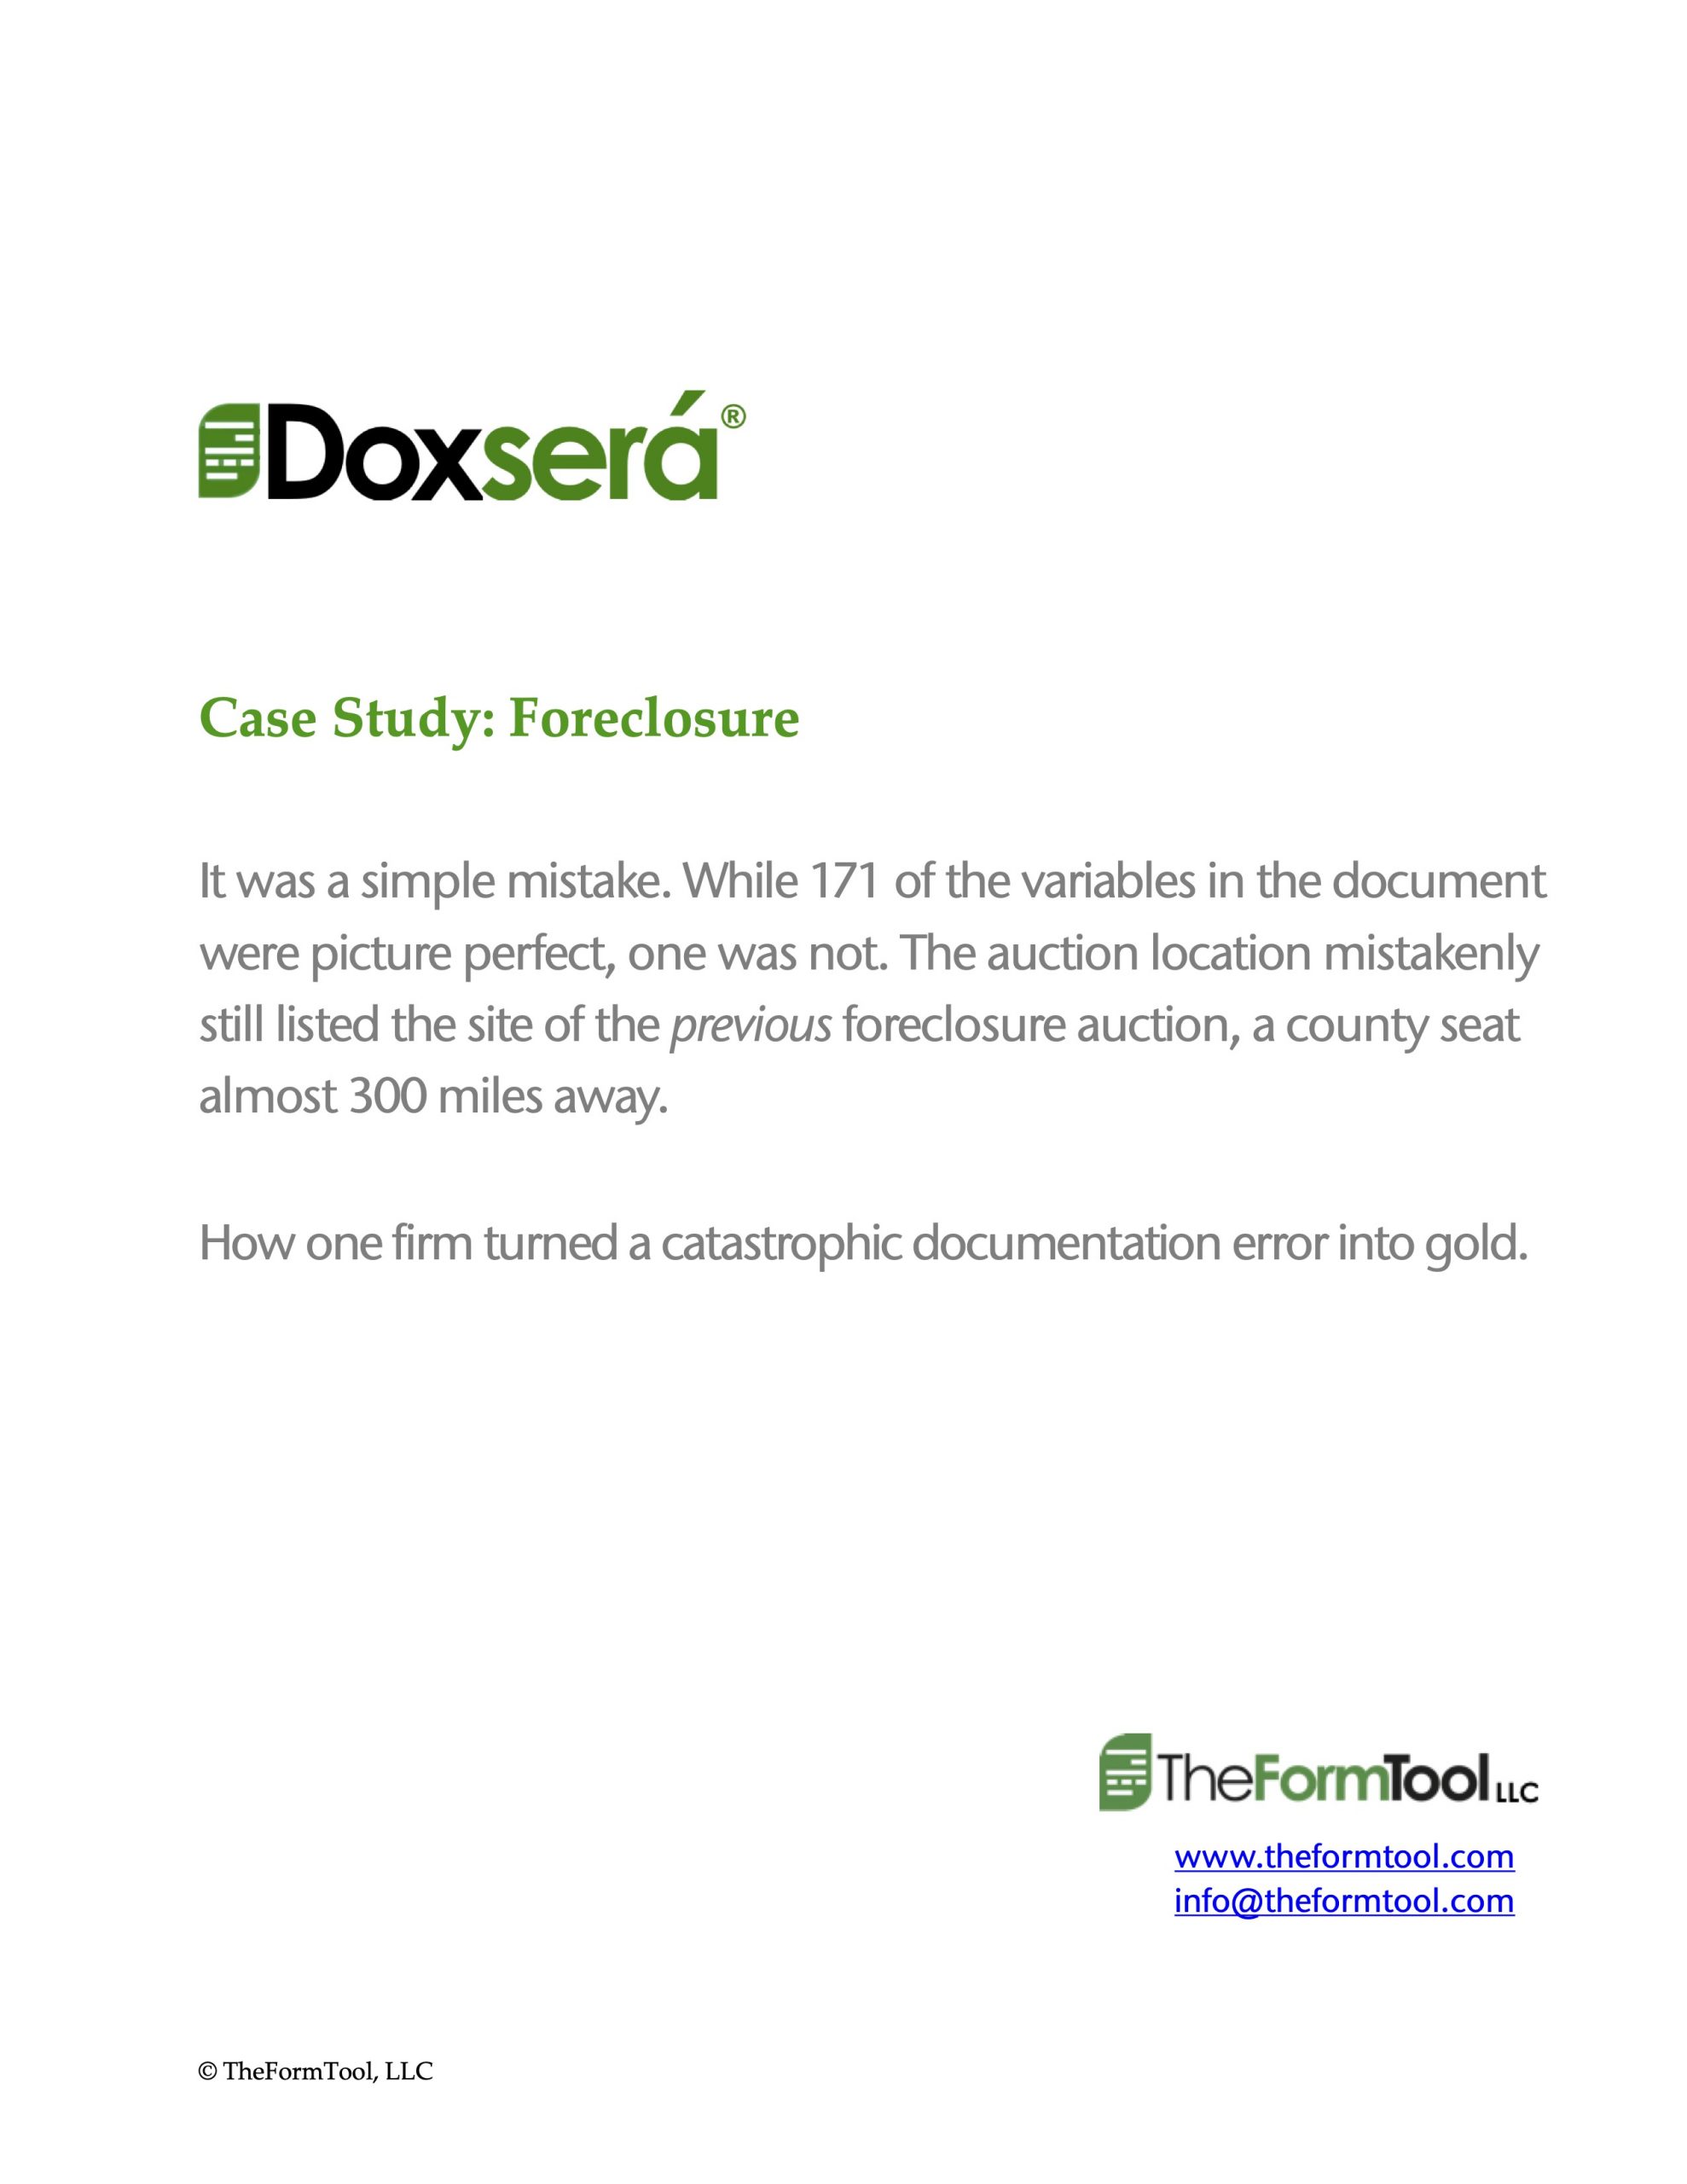 Cases Study: Forclosure download link